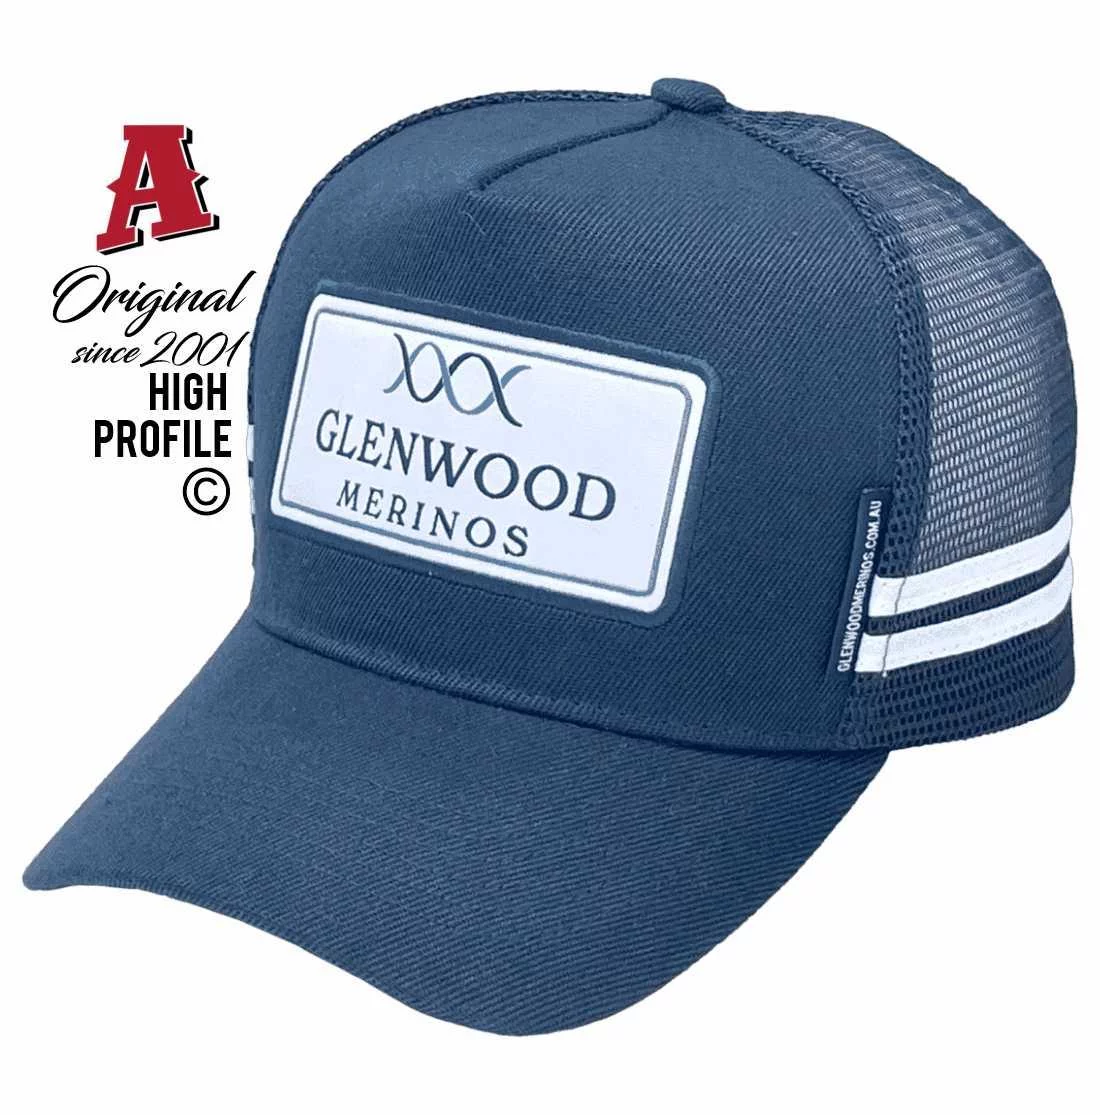 Glenwood Merinos Wellington NSW Basic Aussie Trucker Hats High Profile with Woven Sewn on Badge with Dual Side Bands Navy White Snapback